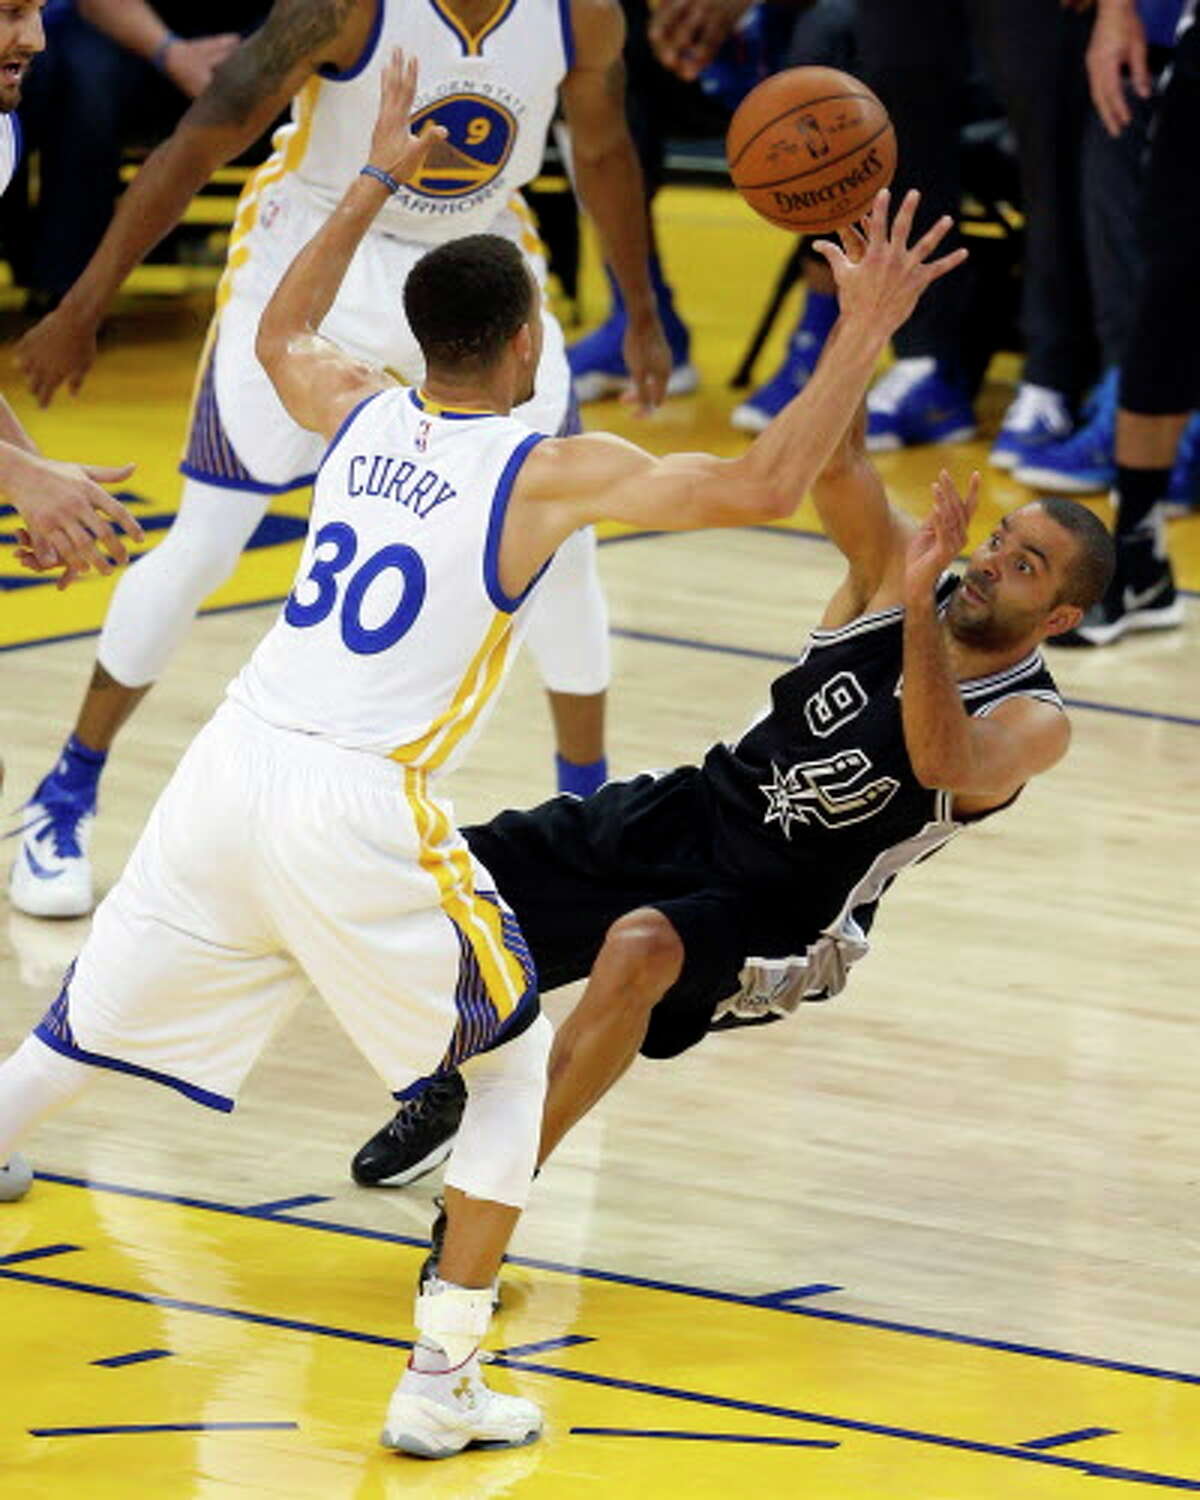 Golden State Warriors' Stephen Curry steals the ball from San Antonio Spurs' Tony Parker in 1st quarter during NBA game at Oracle Arena in Oakland, Calif., on Thursday, April 7, 2016.